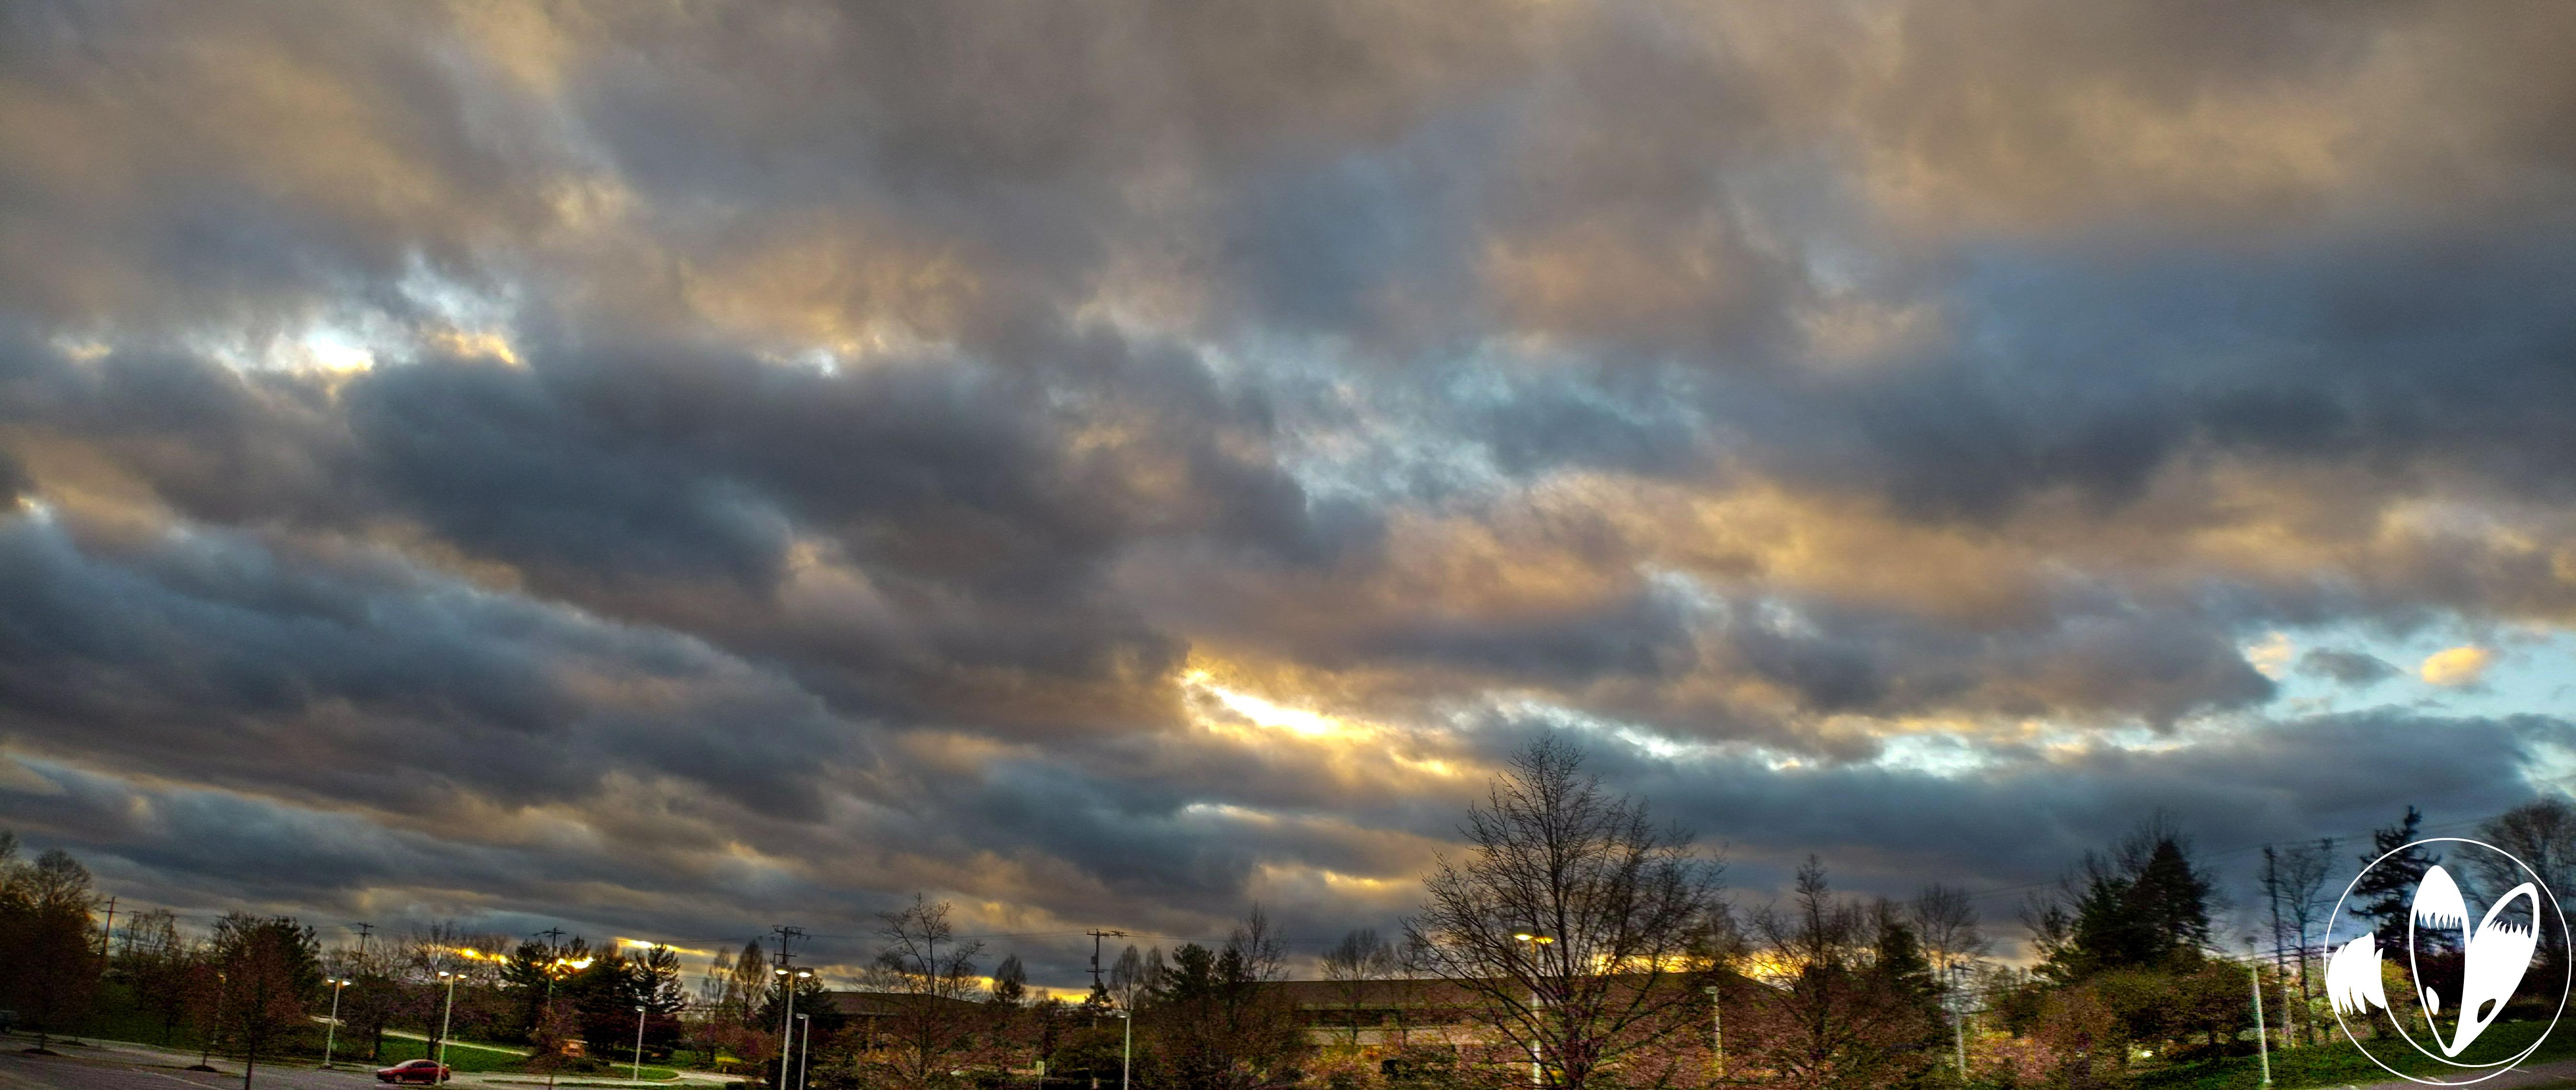 HDR Clouds